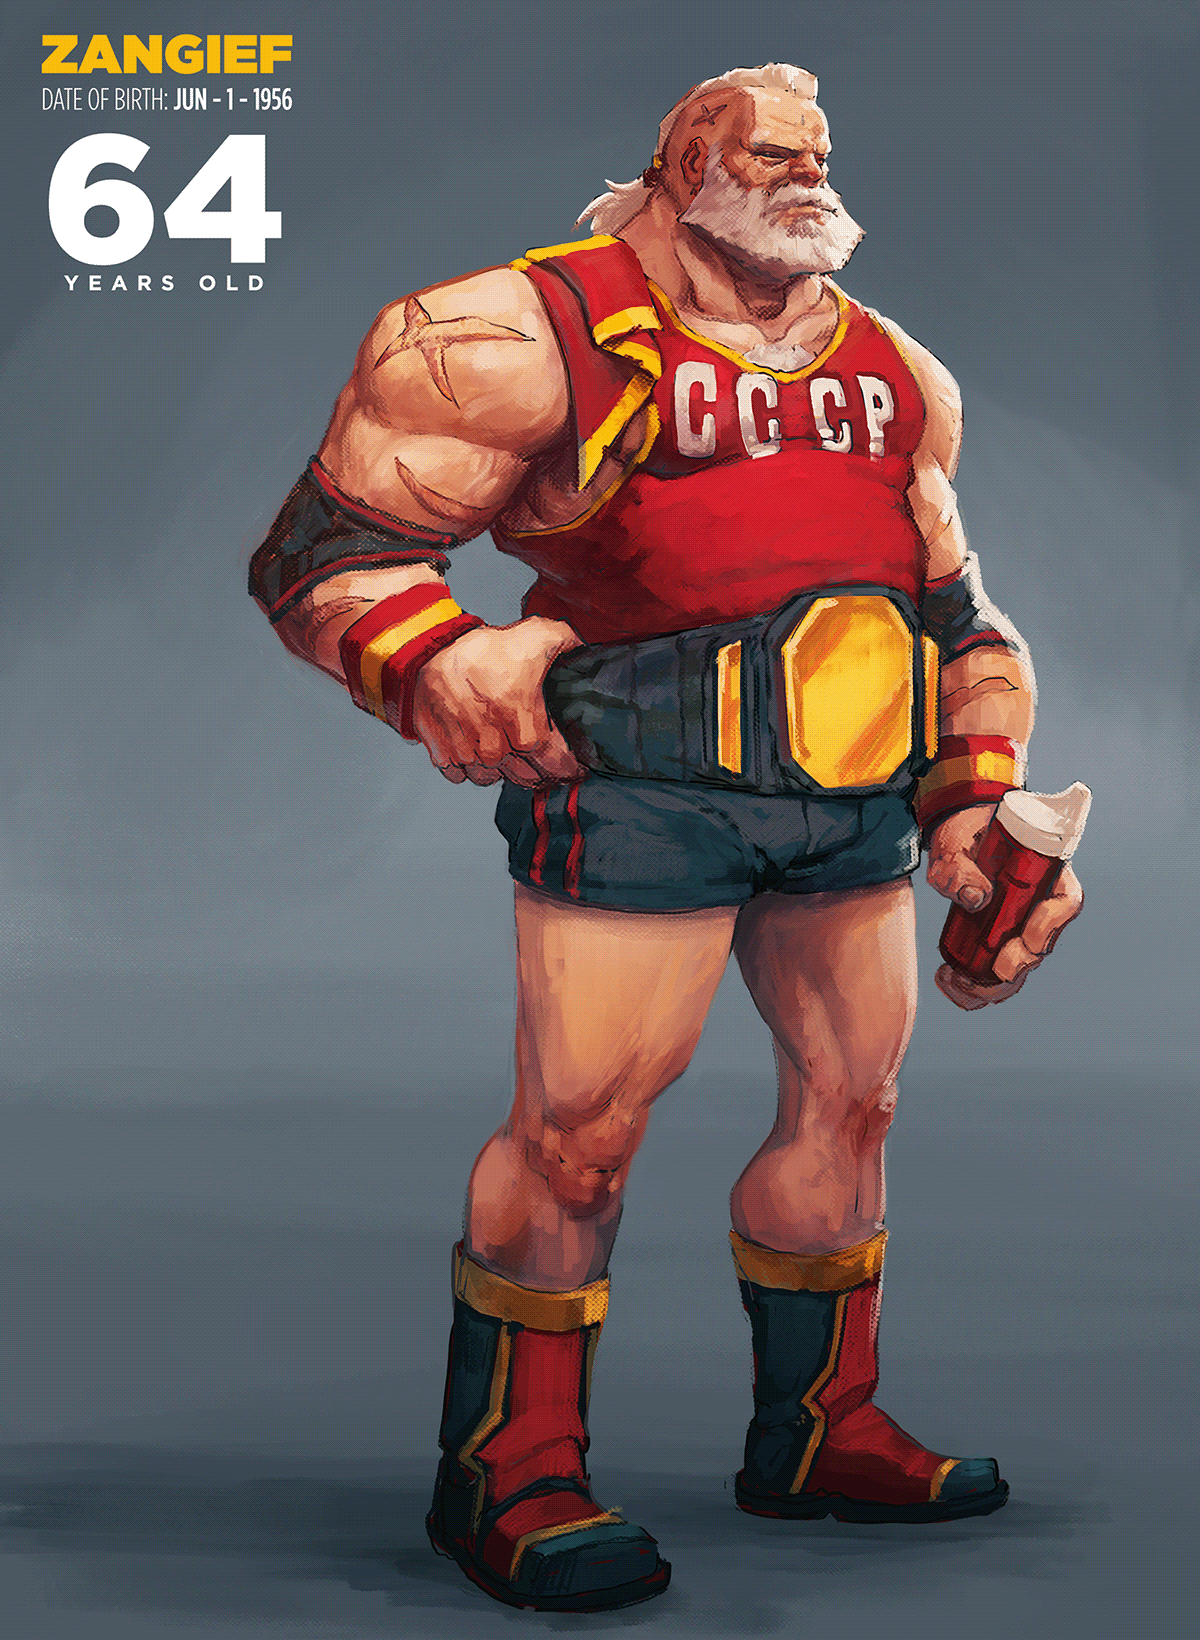 Zangief with 64 years old